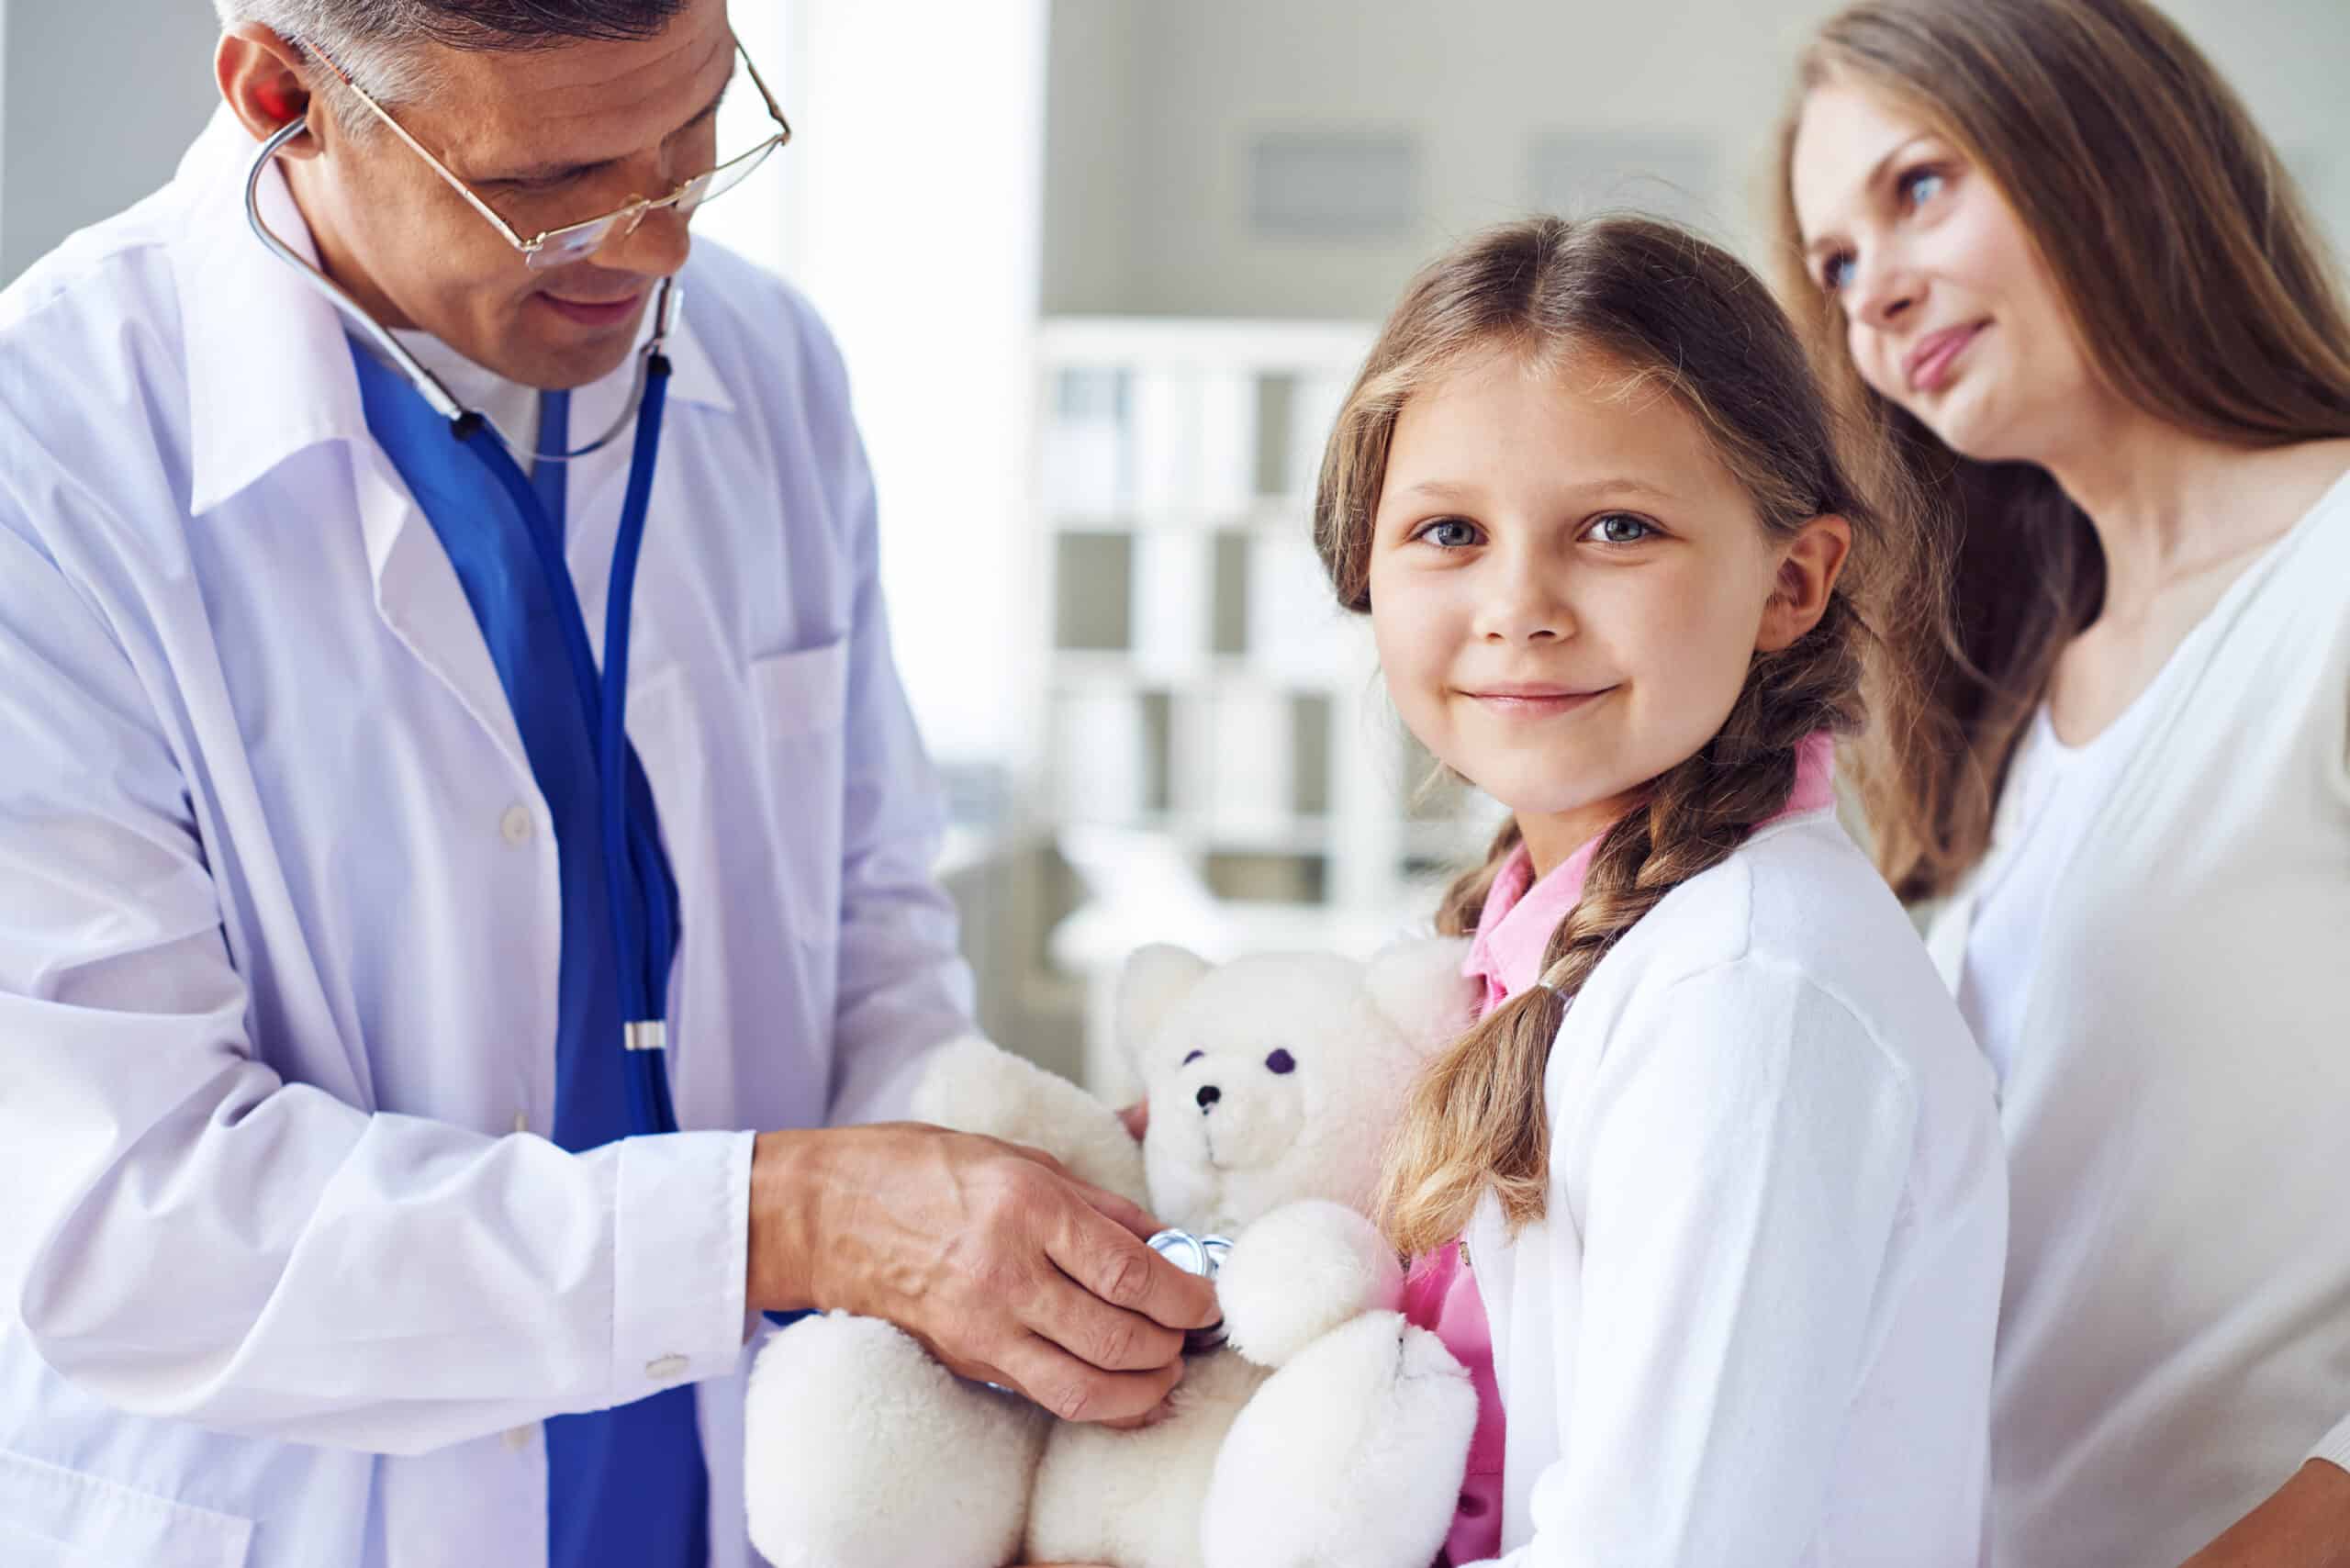 Little girl with teddy bear visiting doctor